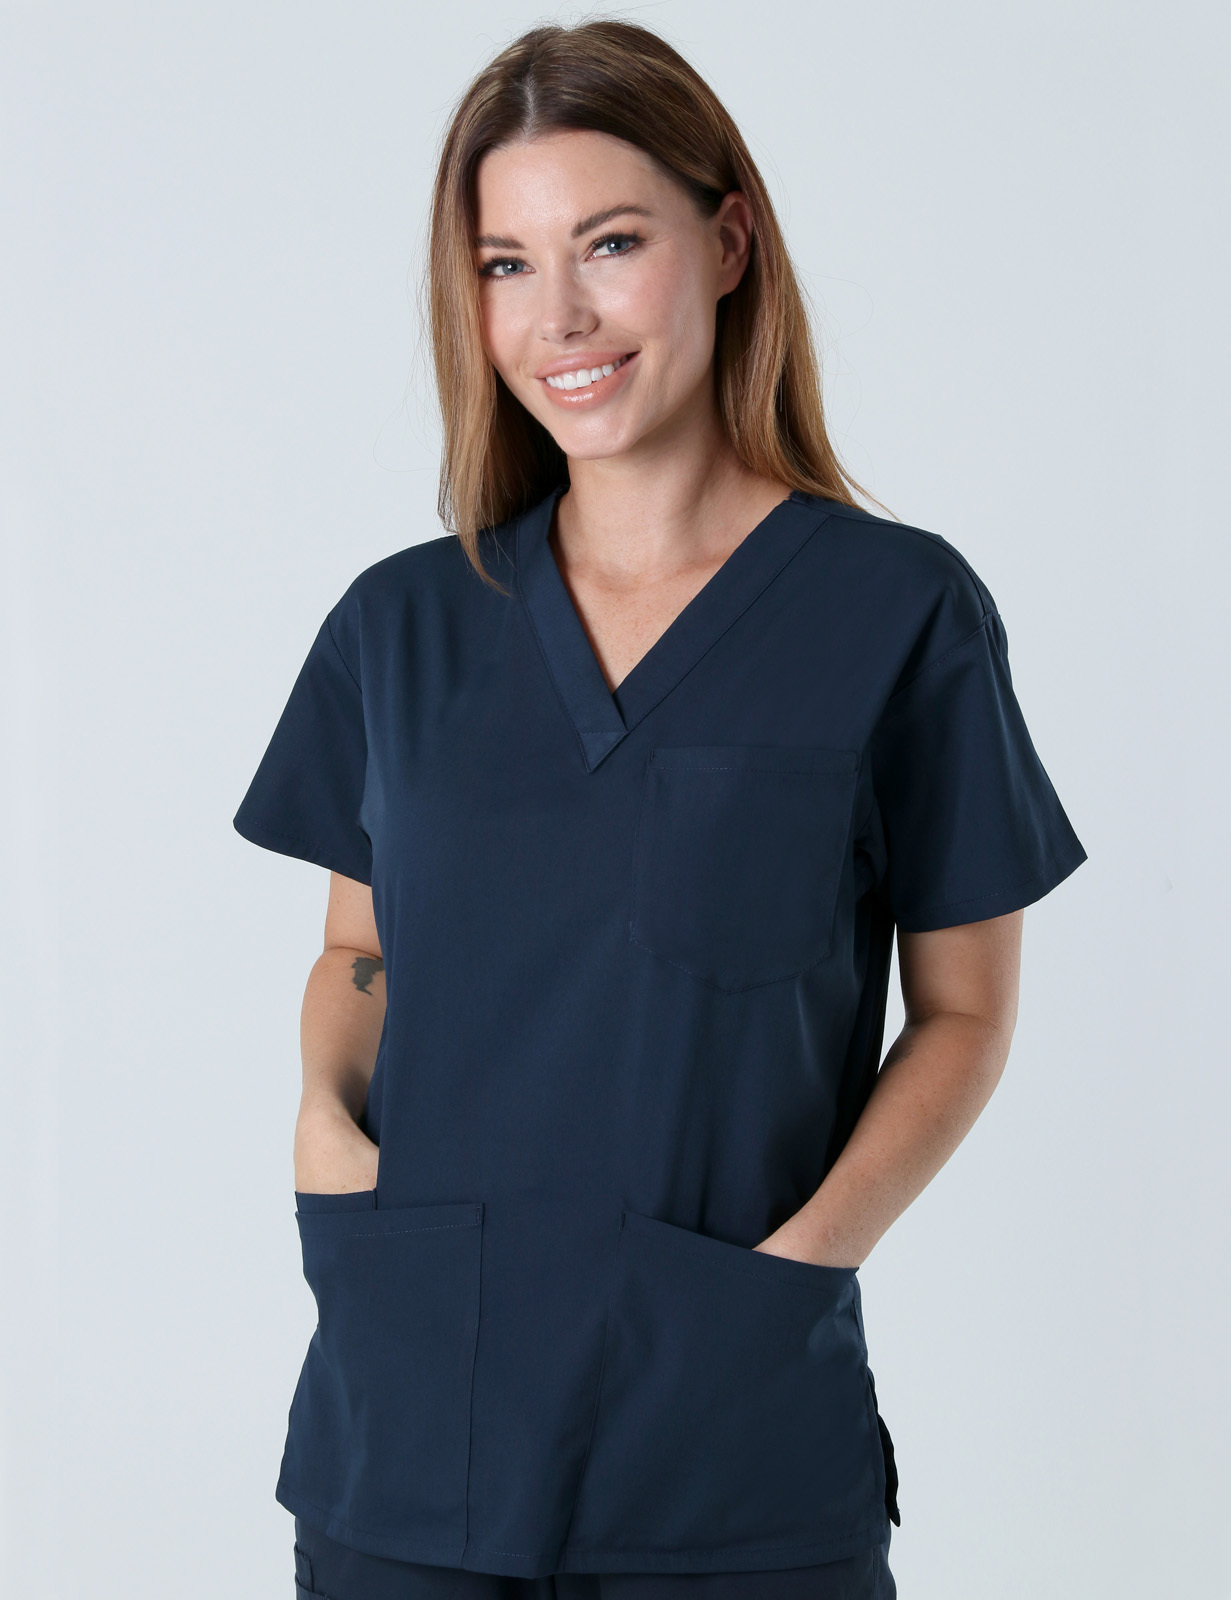 The Angliss Hospital - ED (4 Pocket Scrub Top and Cargo Pants in Navy incl Logos)